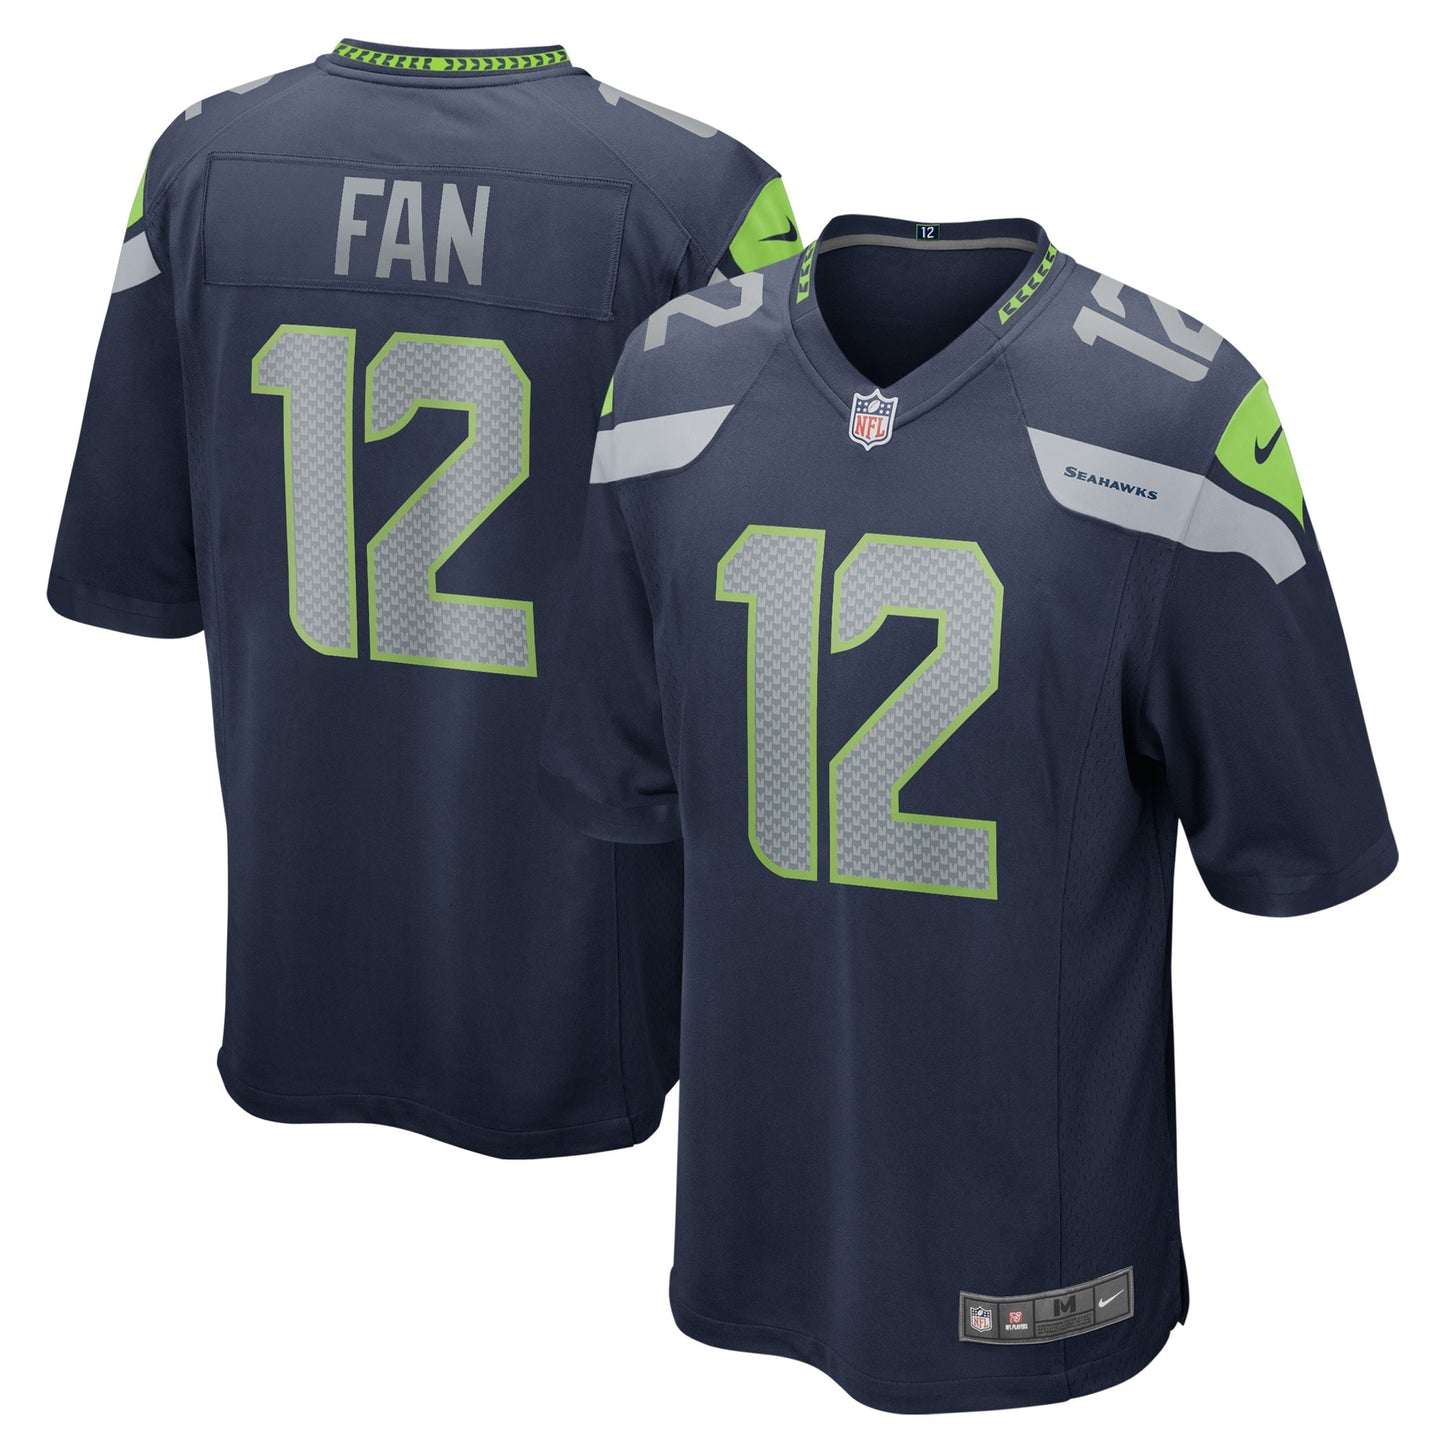 12s Seattle Seahawks Nike Game Jersey &#8211; College Navy